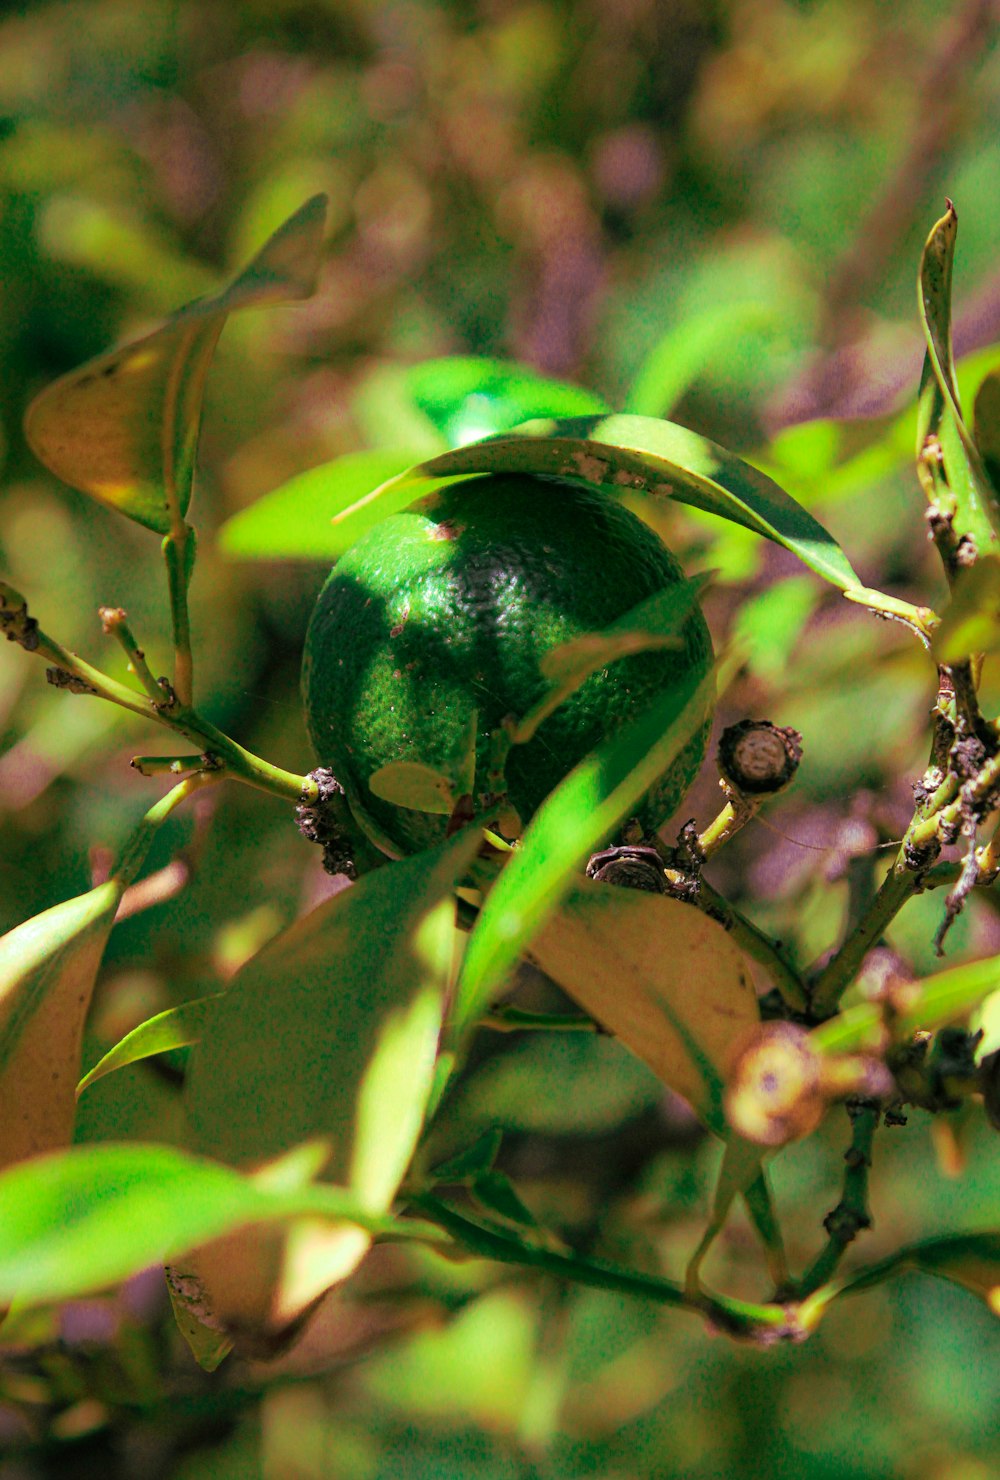 a close up of a green object on a tree branch